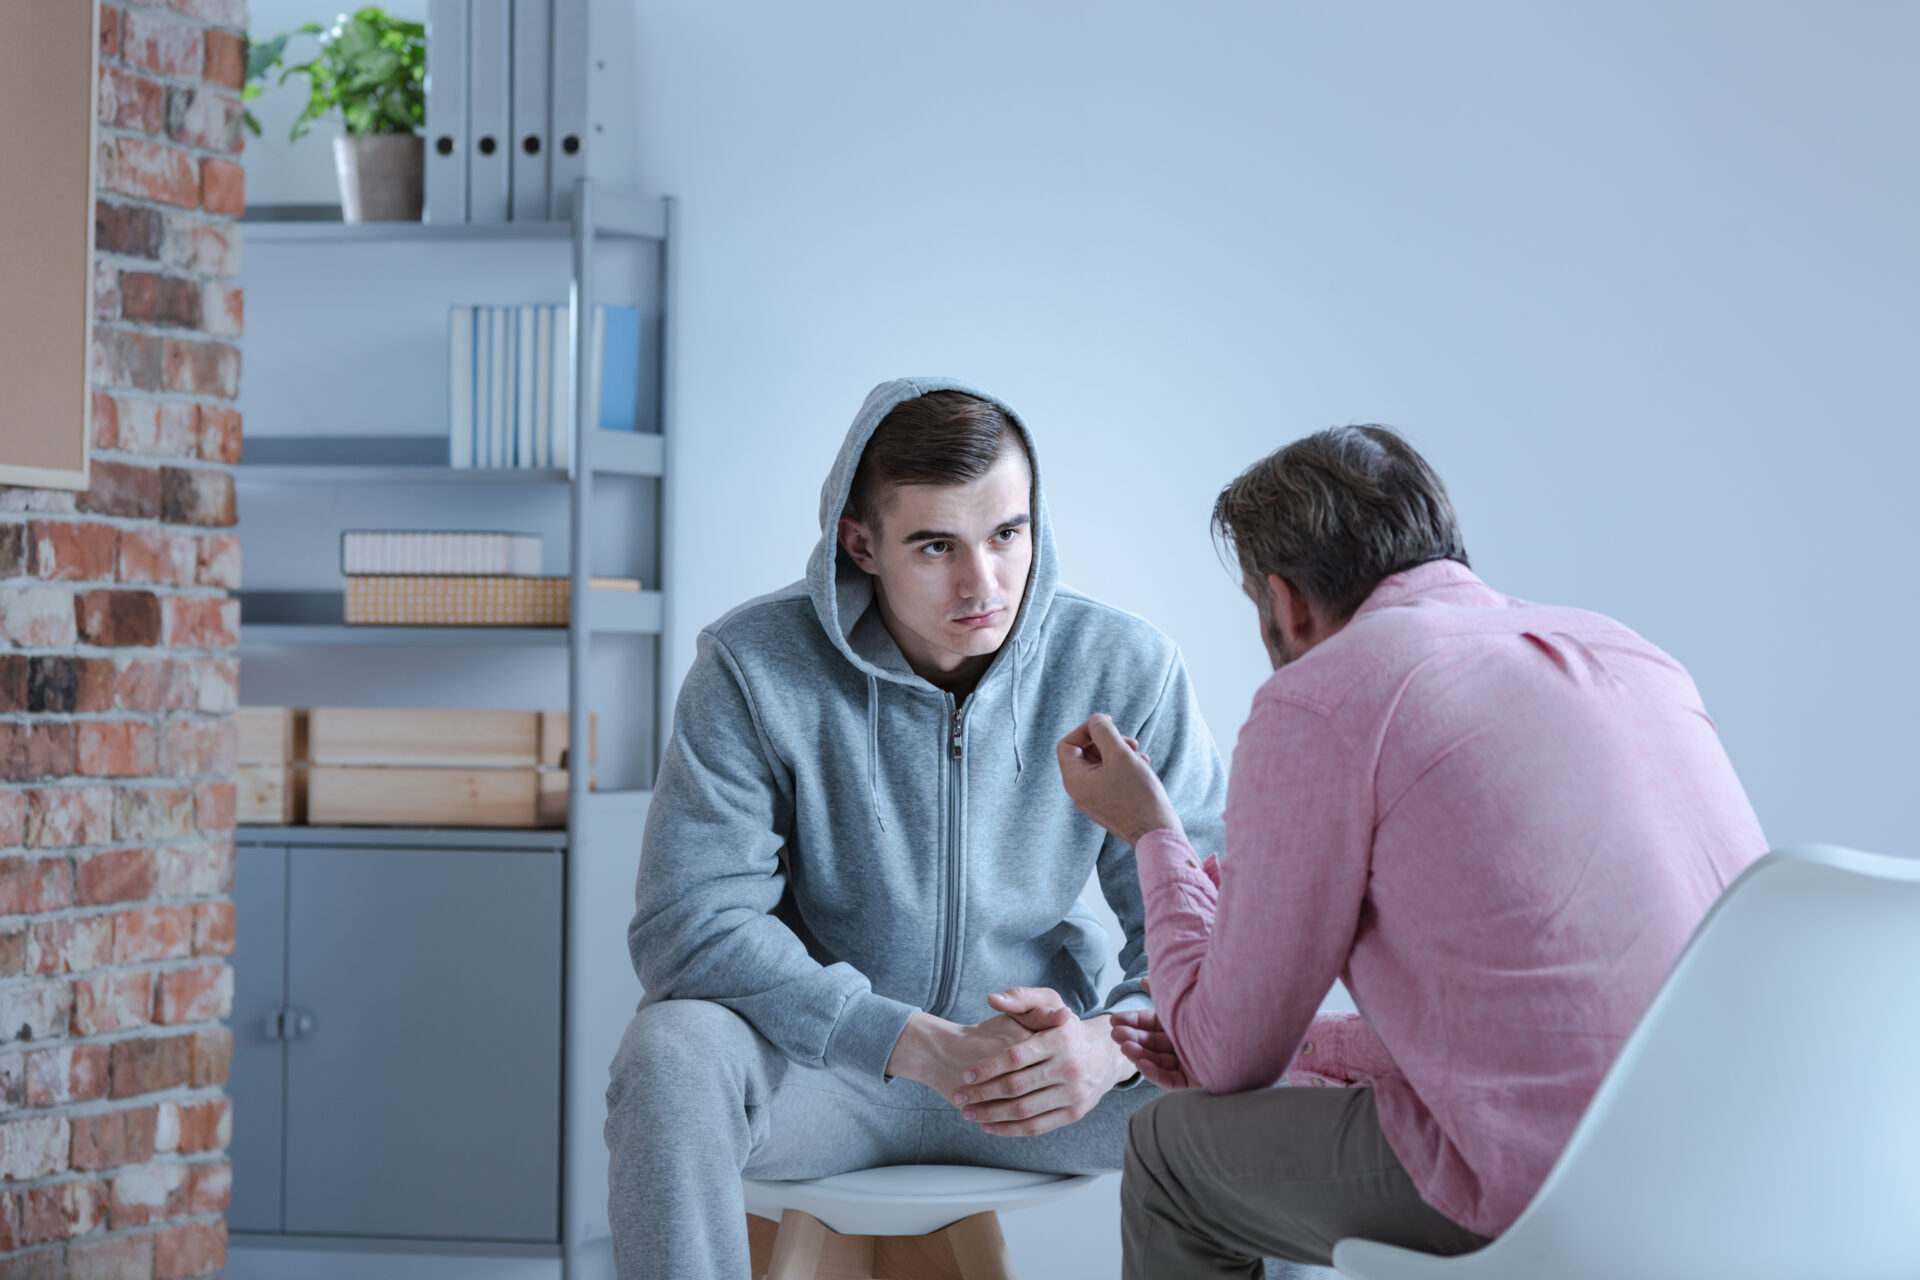 Two men are seen sitting in a room talking to one another. One wears a grey sweatsuit with the hood up around his head while the other, with his back to the camera, wears a pink shirt and appears to be encouraging the man in grey.